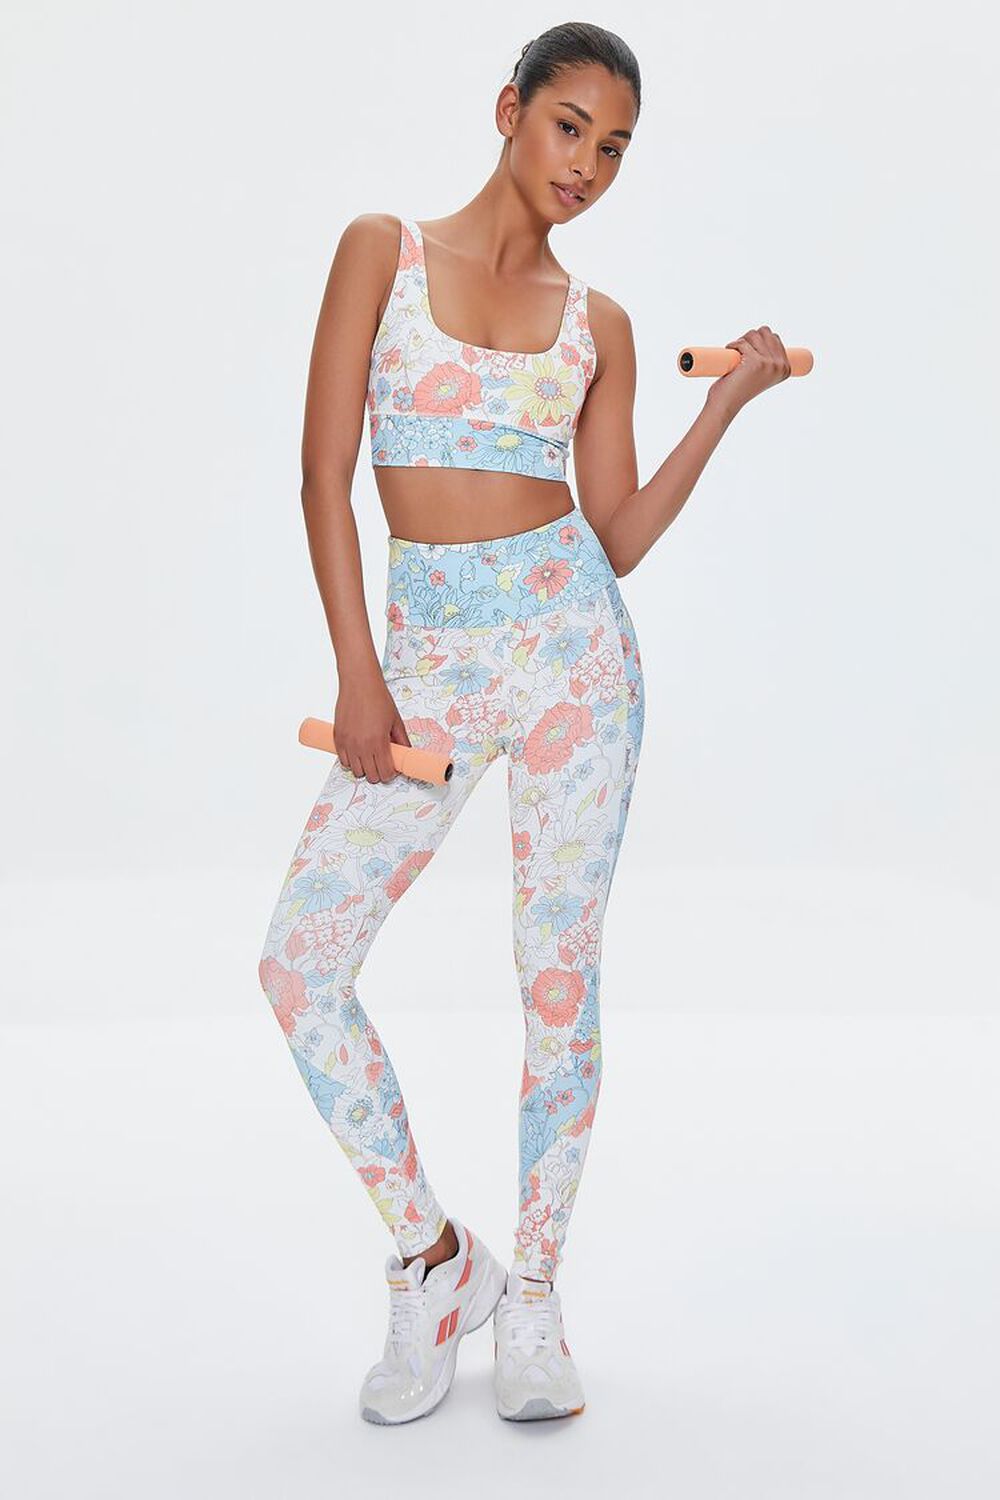 Women's Printed Activewear Sports Bra - Floral Notes, S 